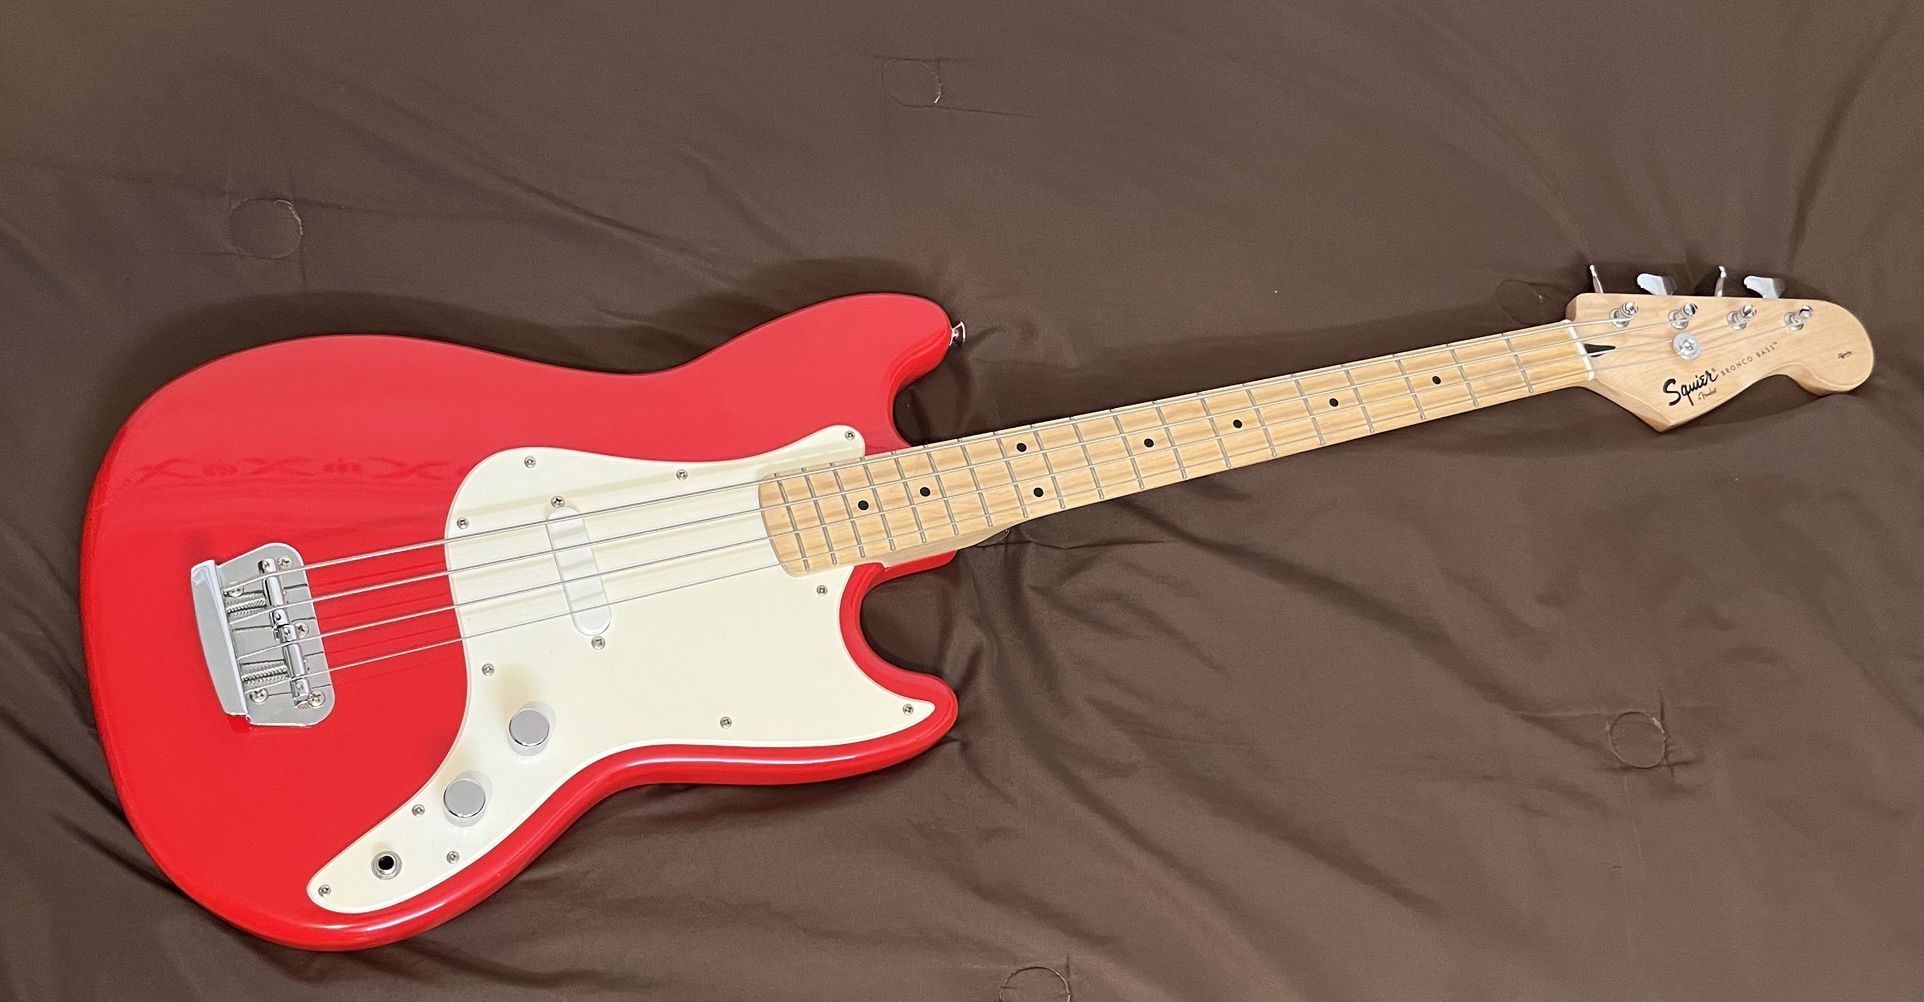 2011 Squier Bronco Bass, short scale (by Fender)